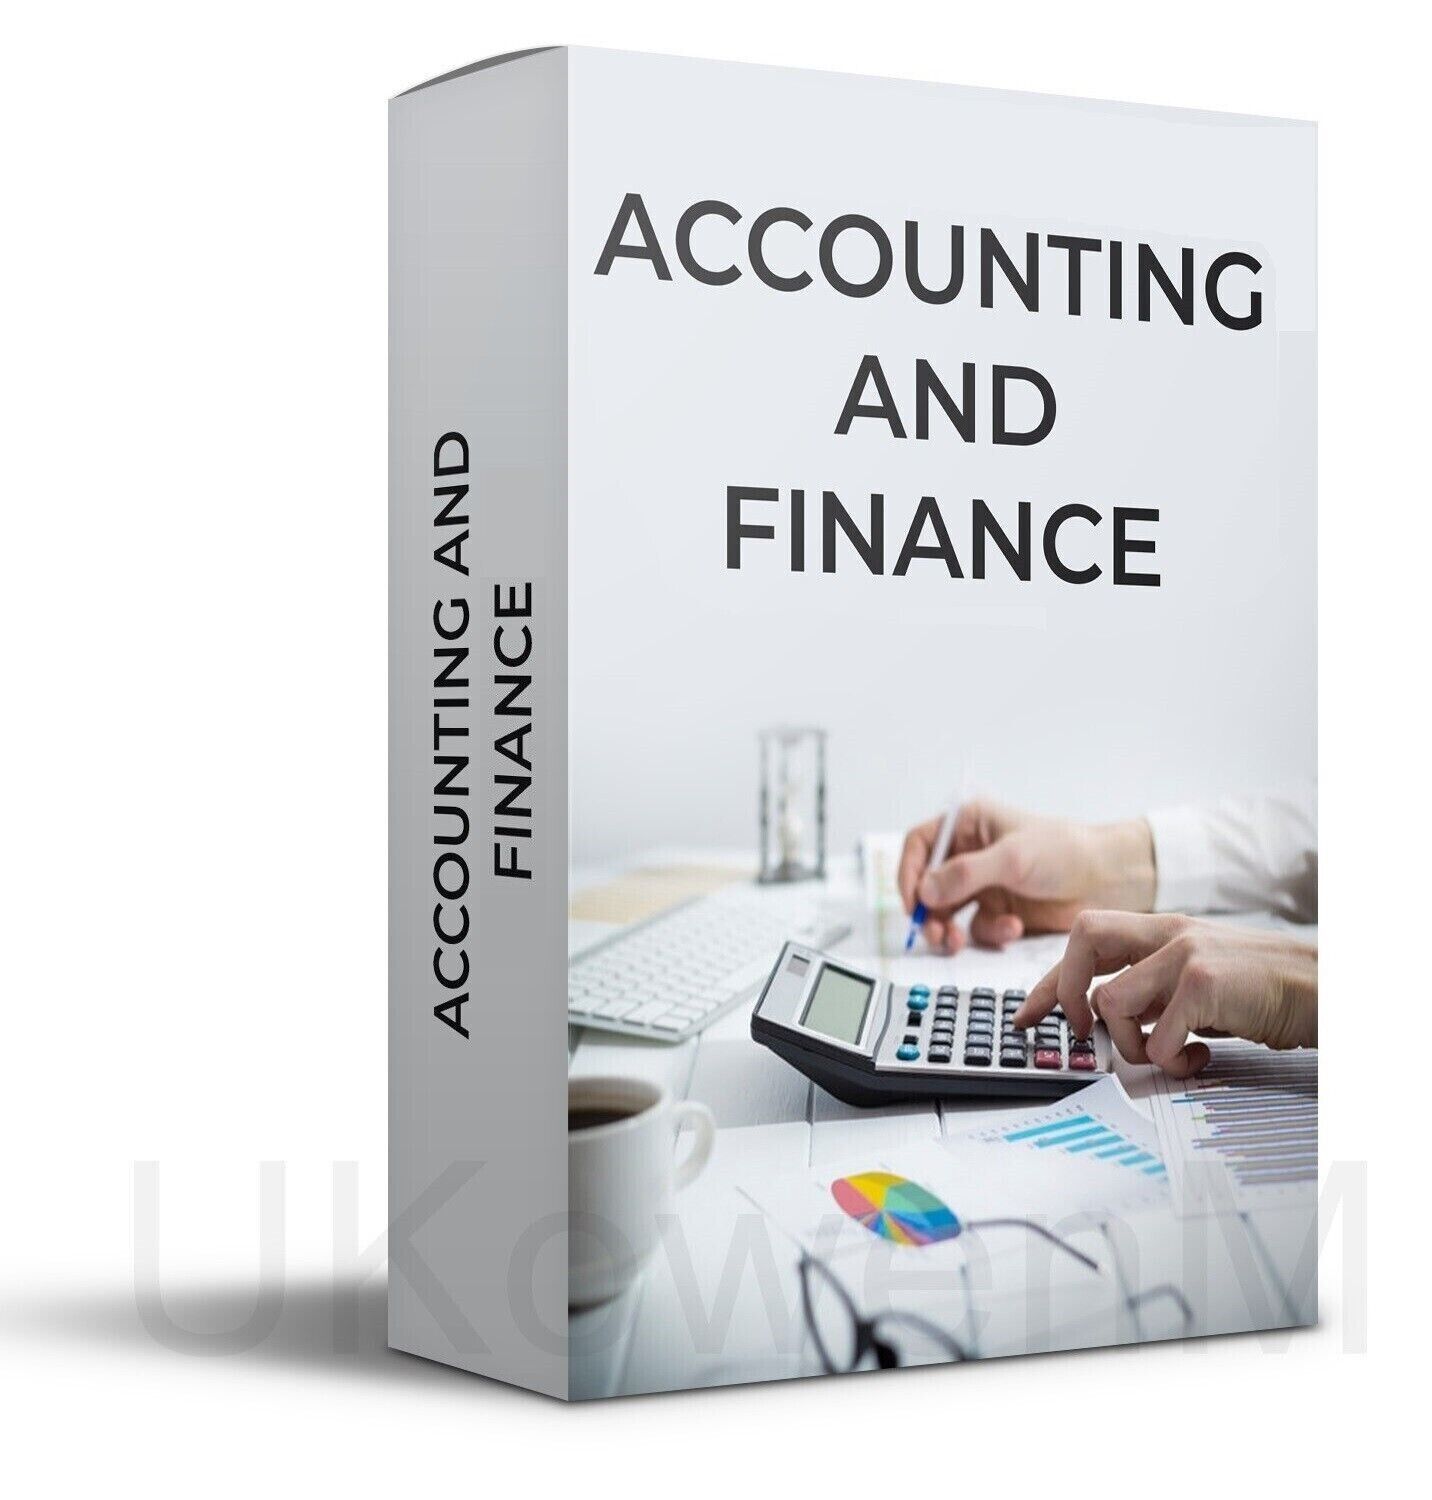 Accounting Small Business Finance Software Bookkeeping VAT Tax Self Employed